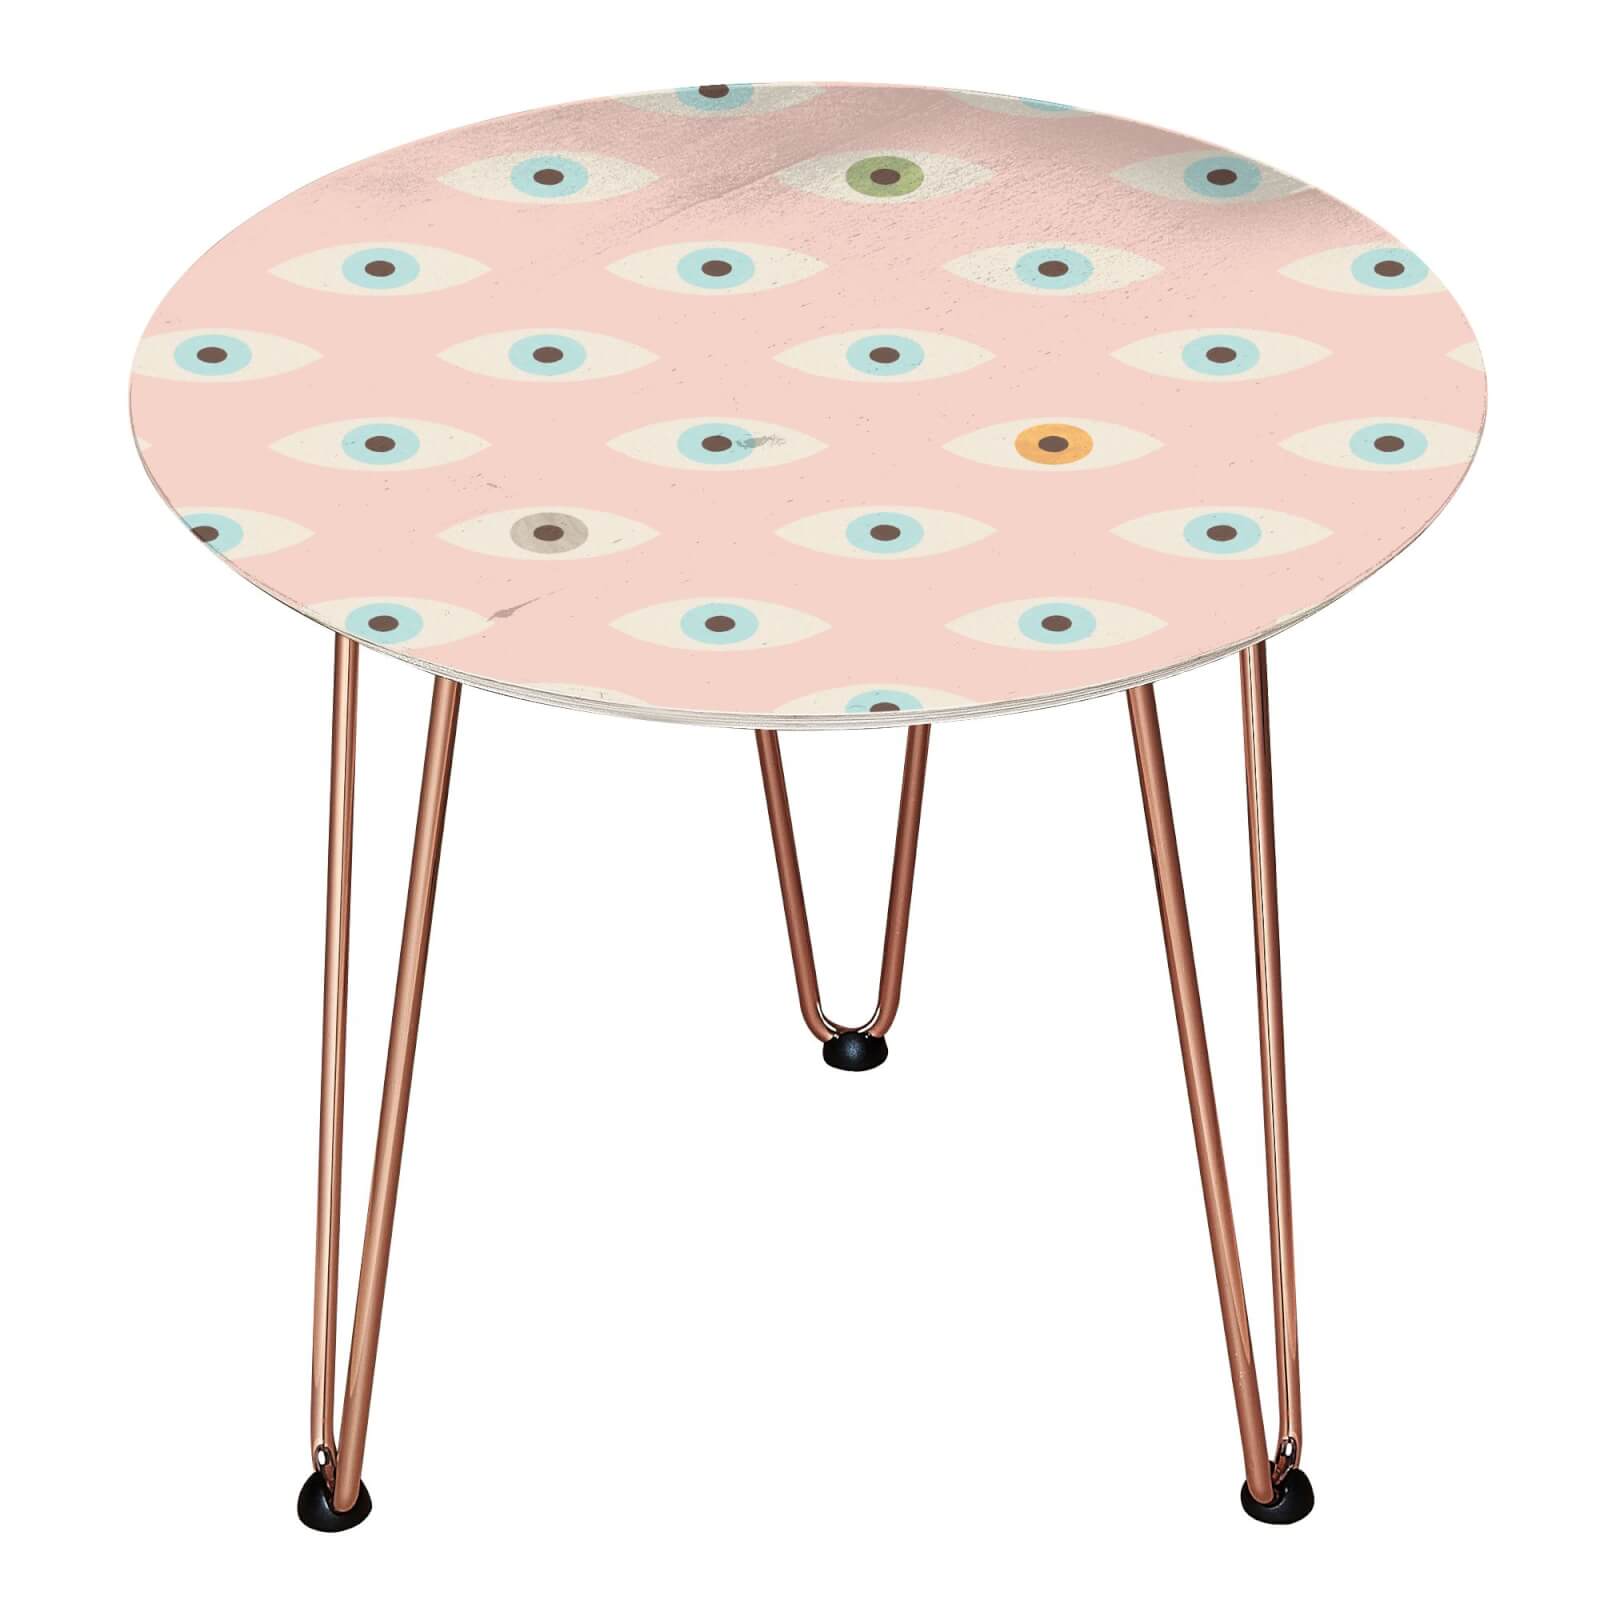 Thousand Eyes Wooden Side Table - Rose gold